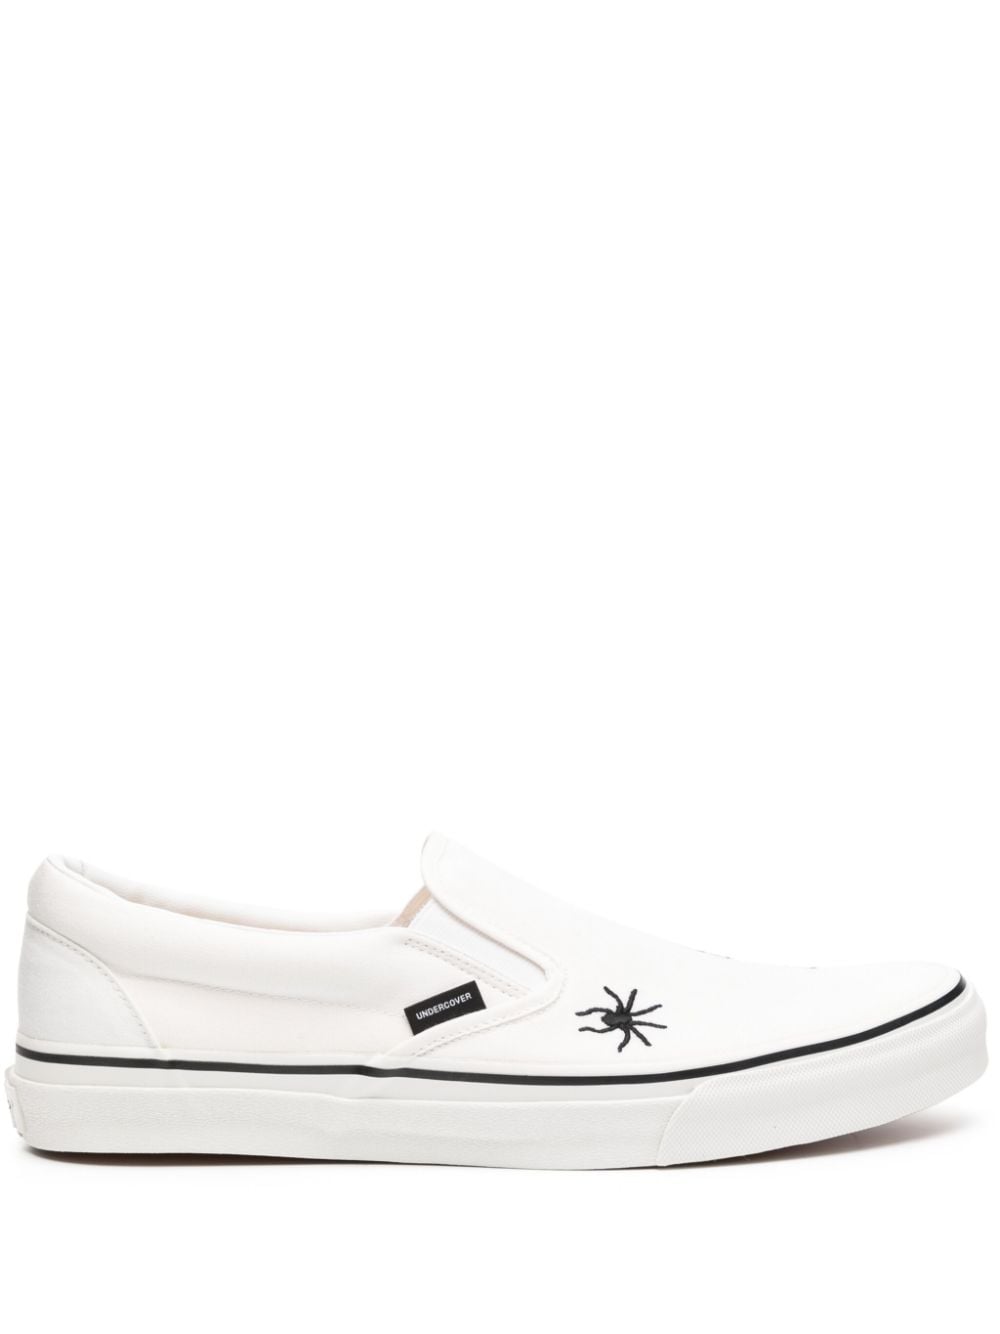 Image 1 of Undercover embroidered-detail slip-on sneakers